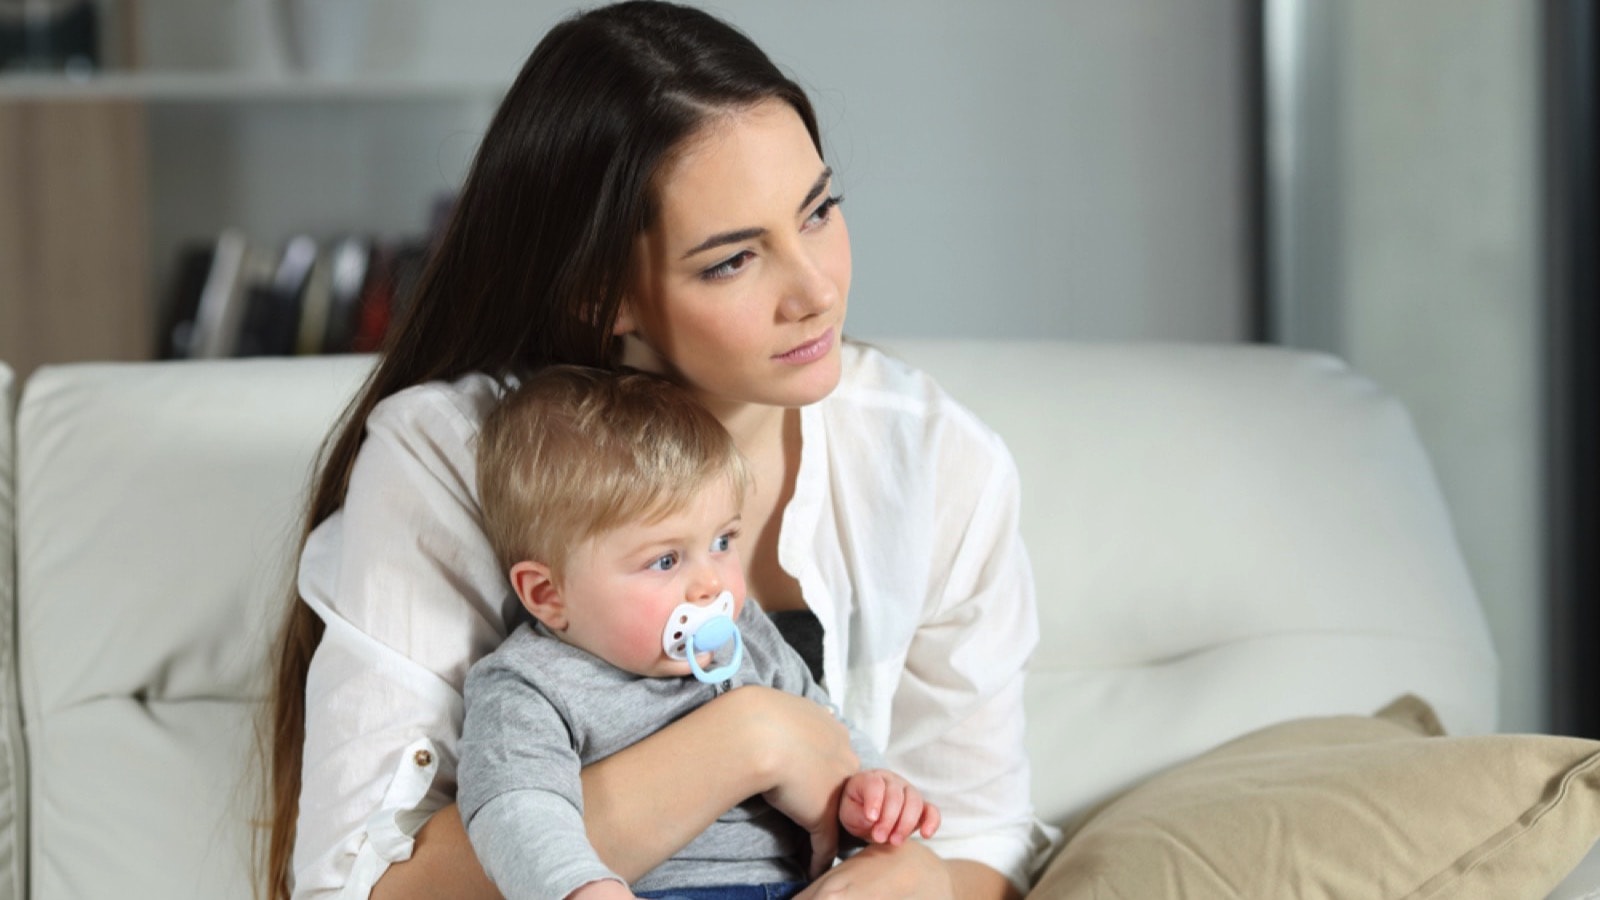 Sad woman looking away with child